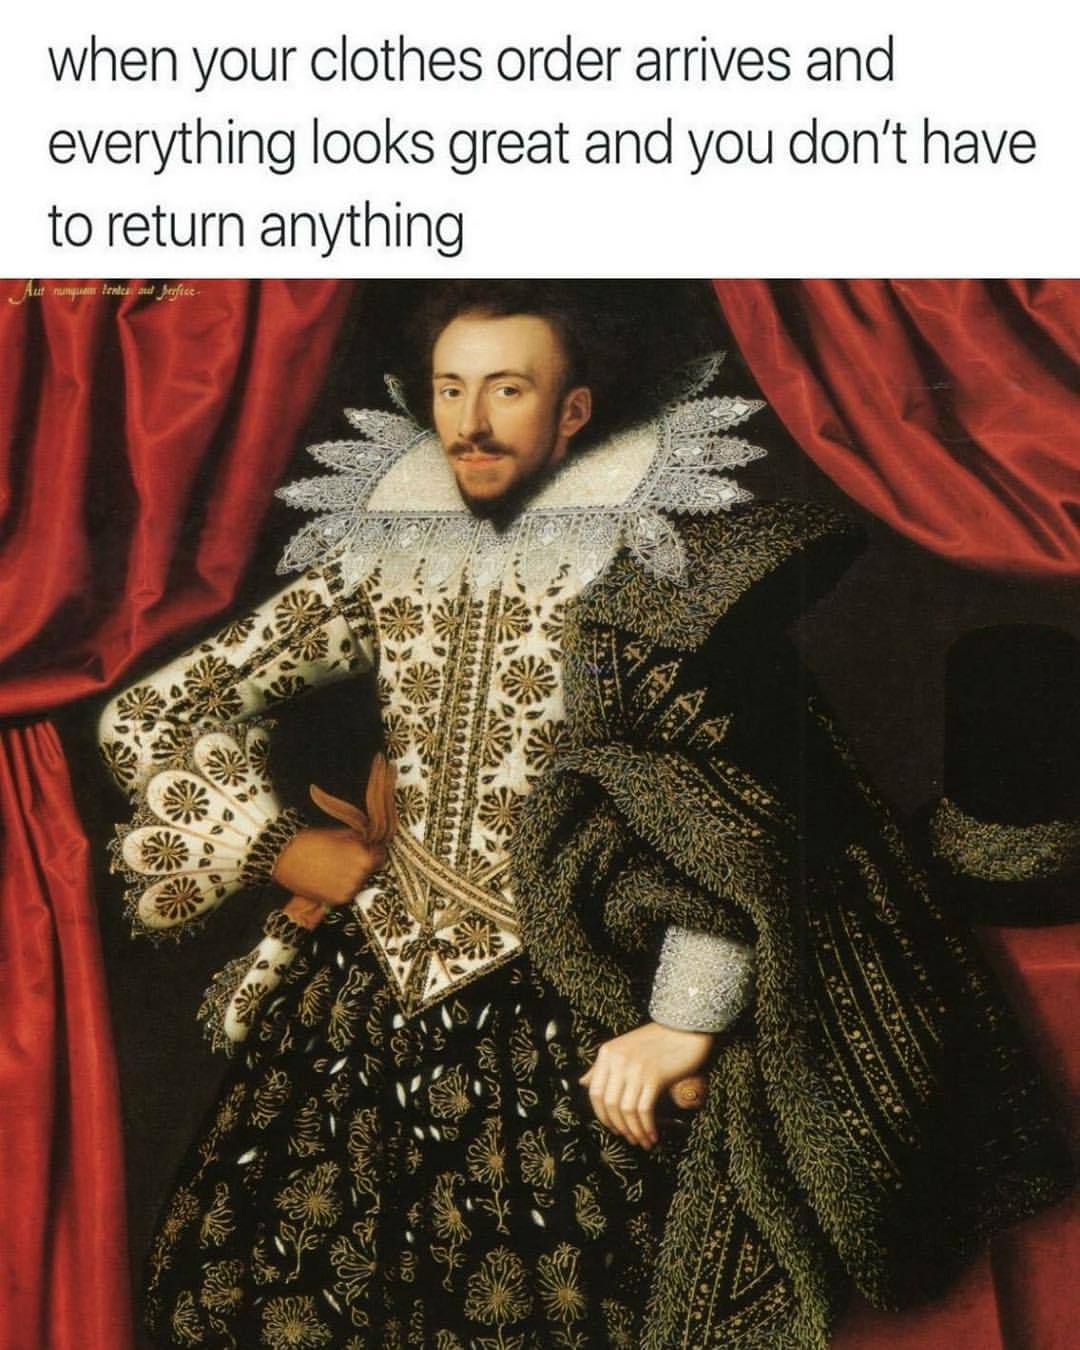 elizabethan era fashion - when your clothes order arrives and everything looks great and you don't have to return anything Auf numai lent au Serfte A na wan